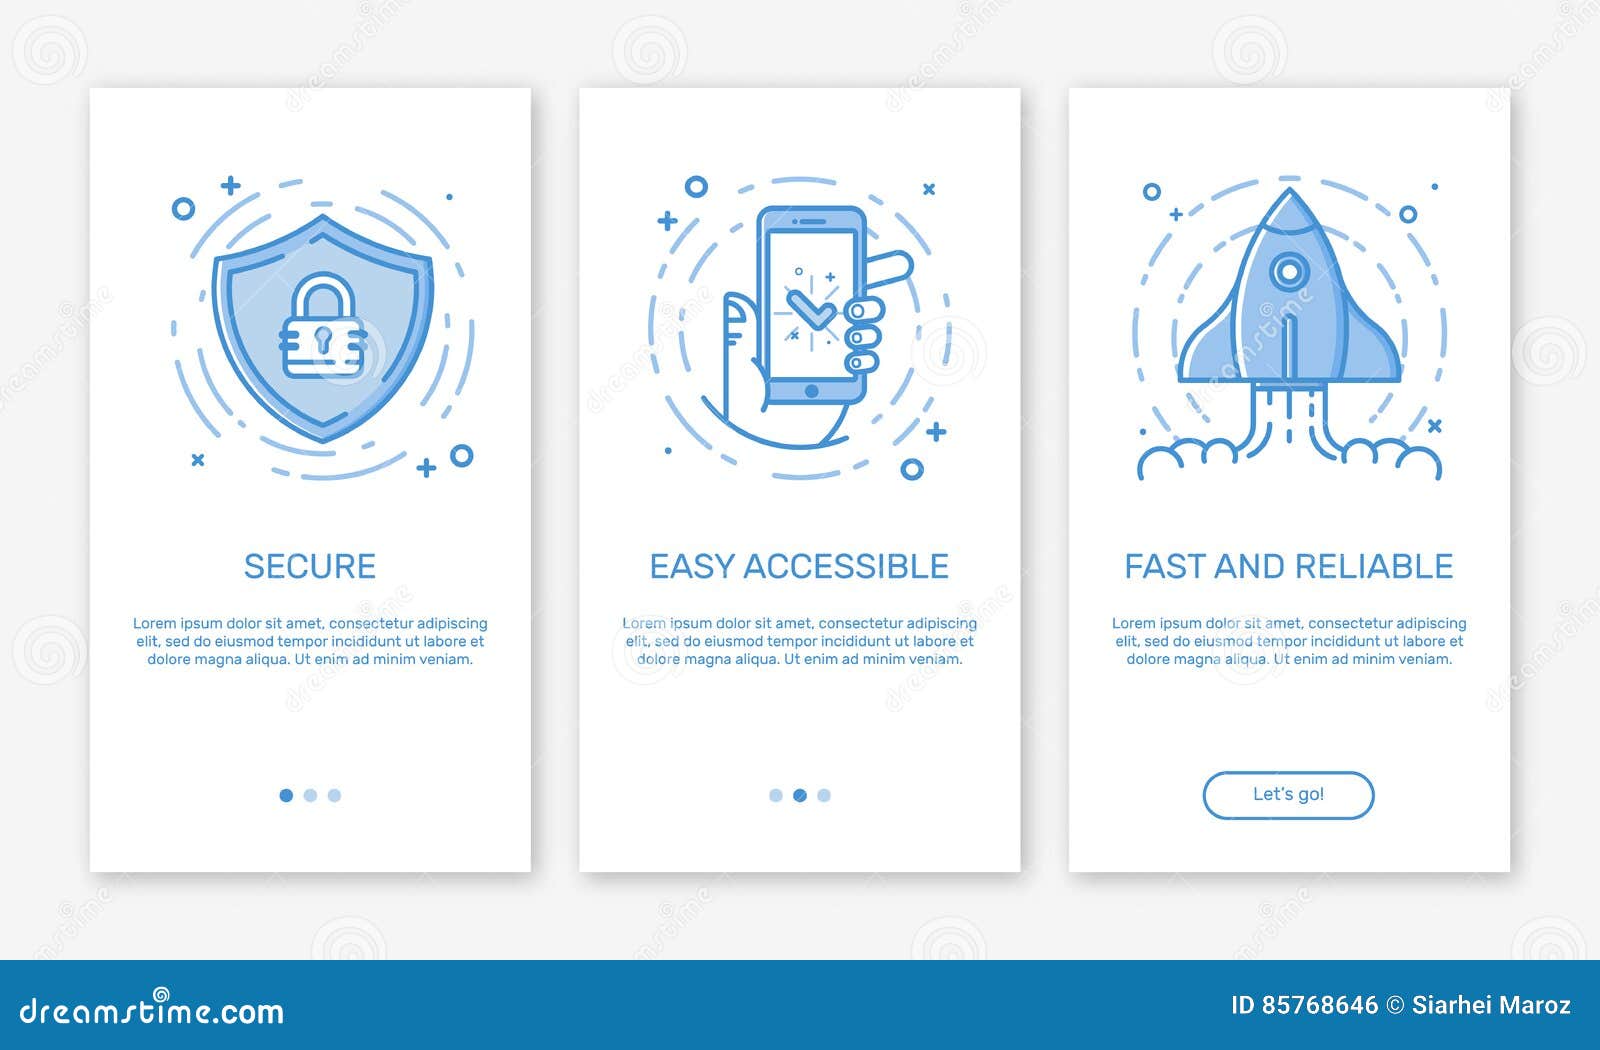 Vector Illustration Of Onboarding App Screens And Web Concept Design Team For Mobile Apps In